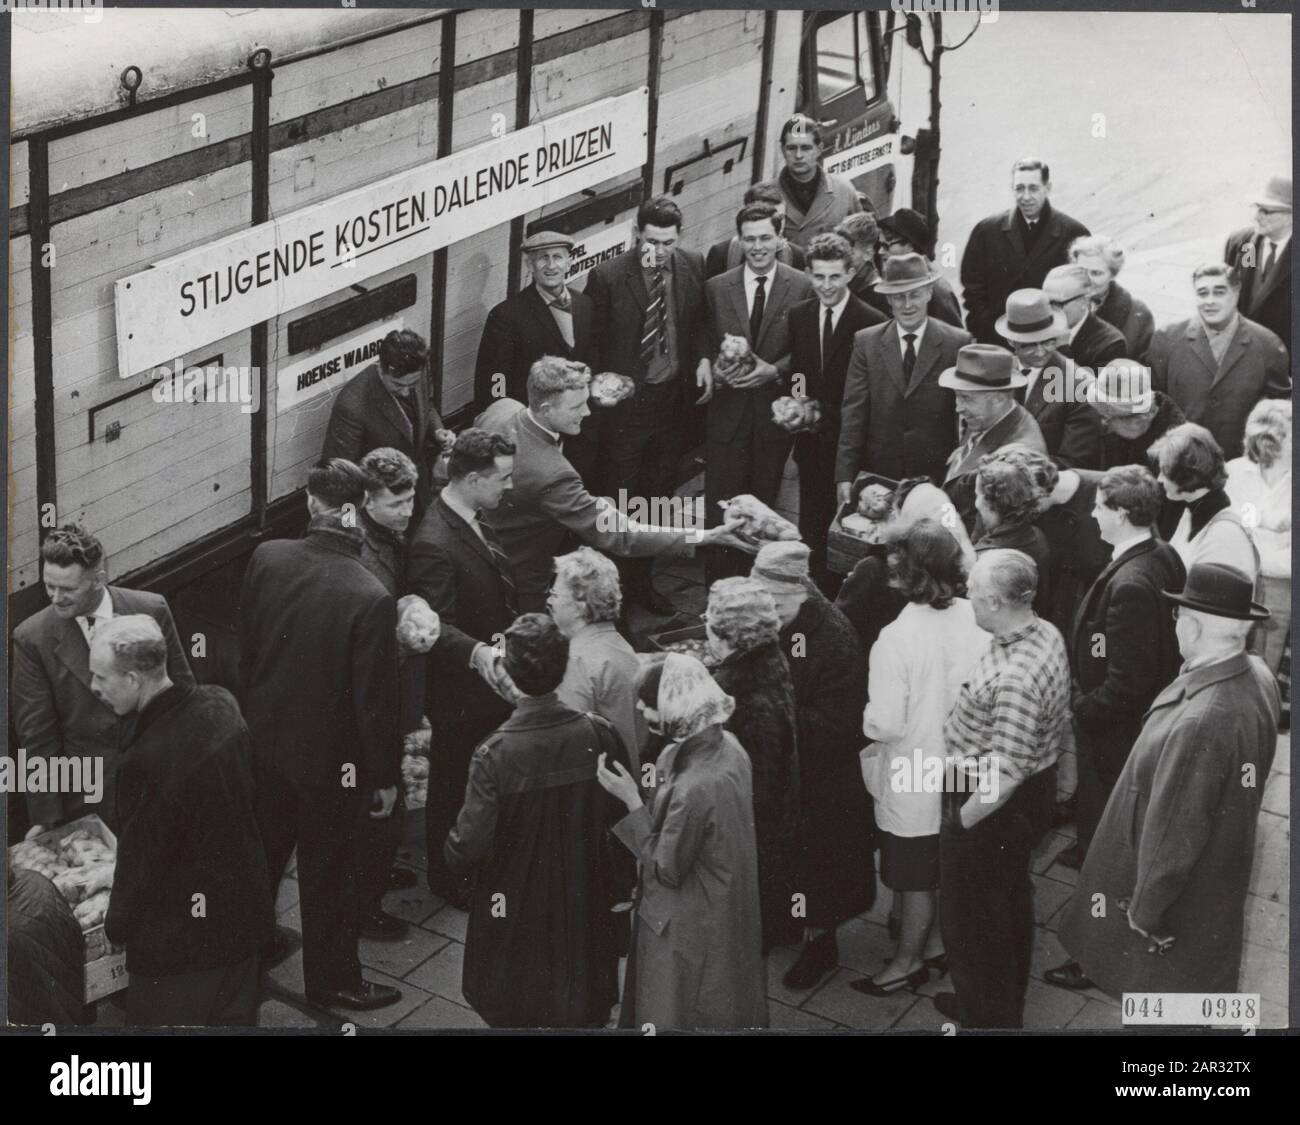 Serie 044-0938 t/m 044-0939 Out of protest against low prices for potatoes they are given away Date: February 28, 1964 Location: The Hague, Zuid-Holland Keywords: MINISTERIES, Farmers protests, government policy, food products Stock Photo